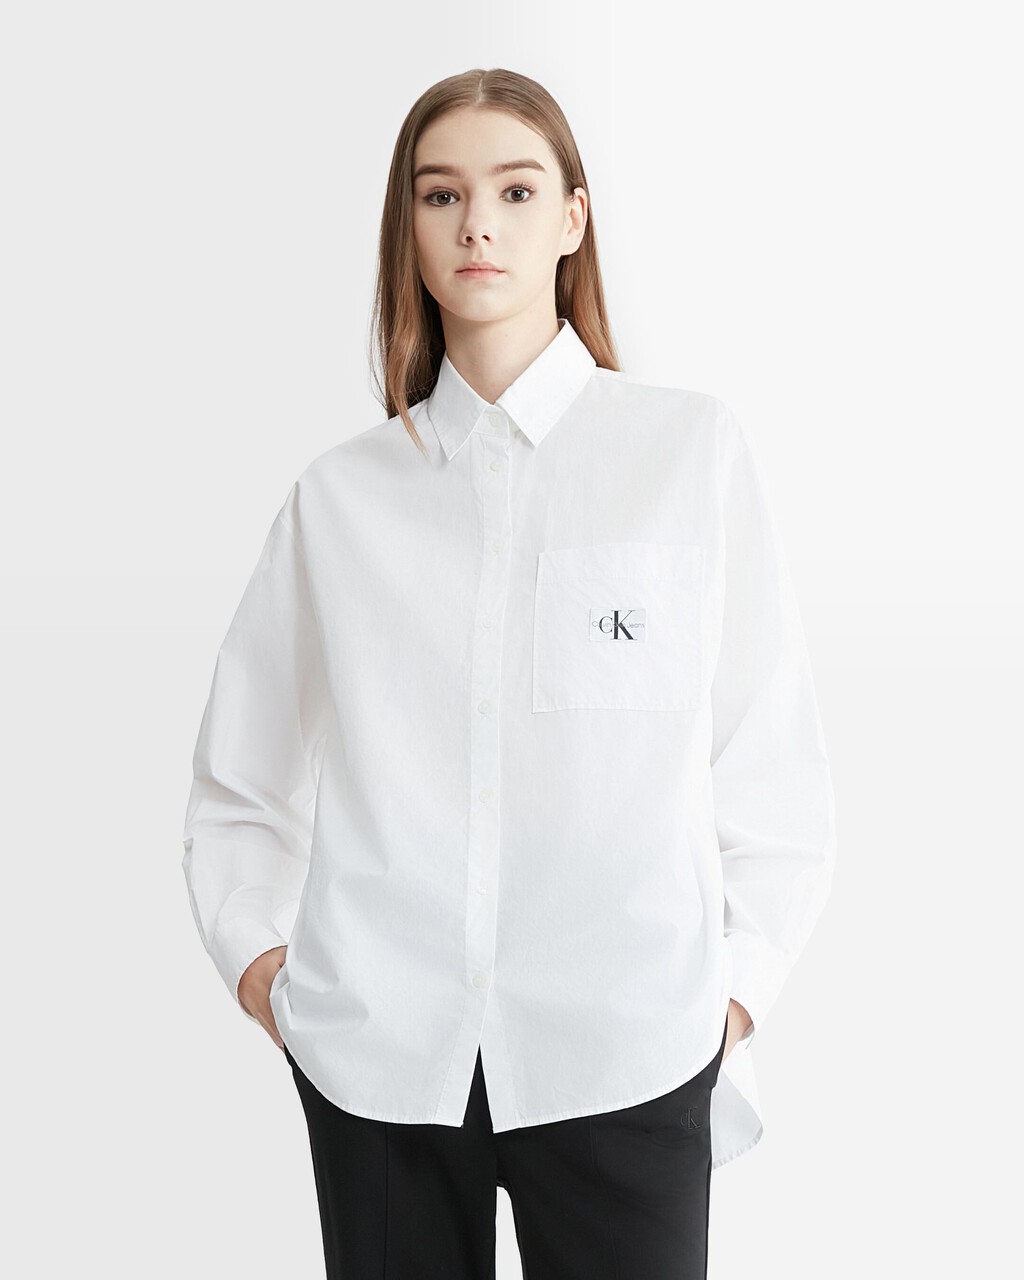 Essential Woven Label Relaxed Shirt, Bright White, hi-res